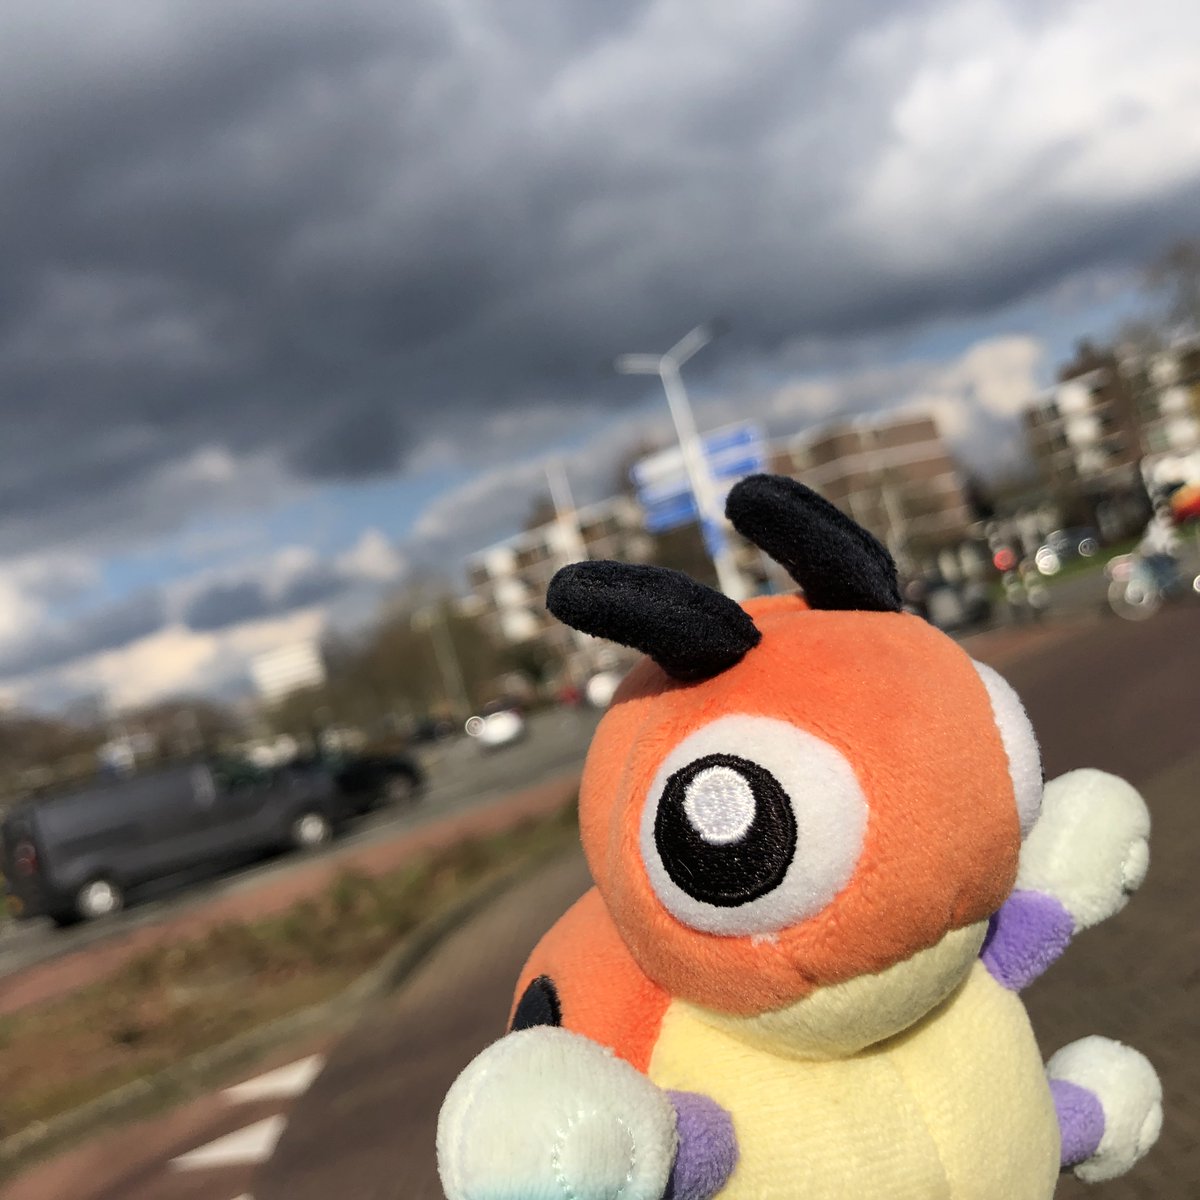 These clouds are a lot darker than Swablu's and Altaria's cloudy wings.

#LedybaSnap #PokemonSnap #Pokemon #PokemonGo #Ledyba #Rediba #レディバ #ポケットモンスター #Eindhoven